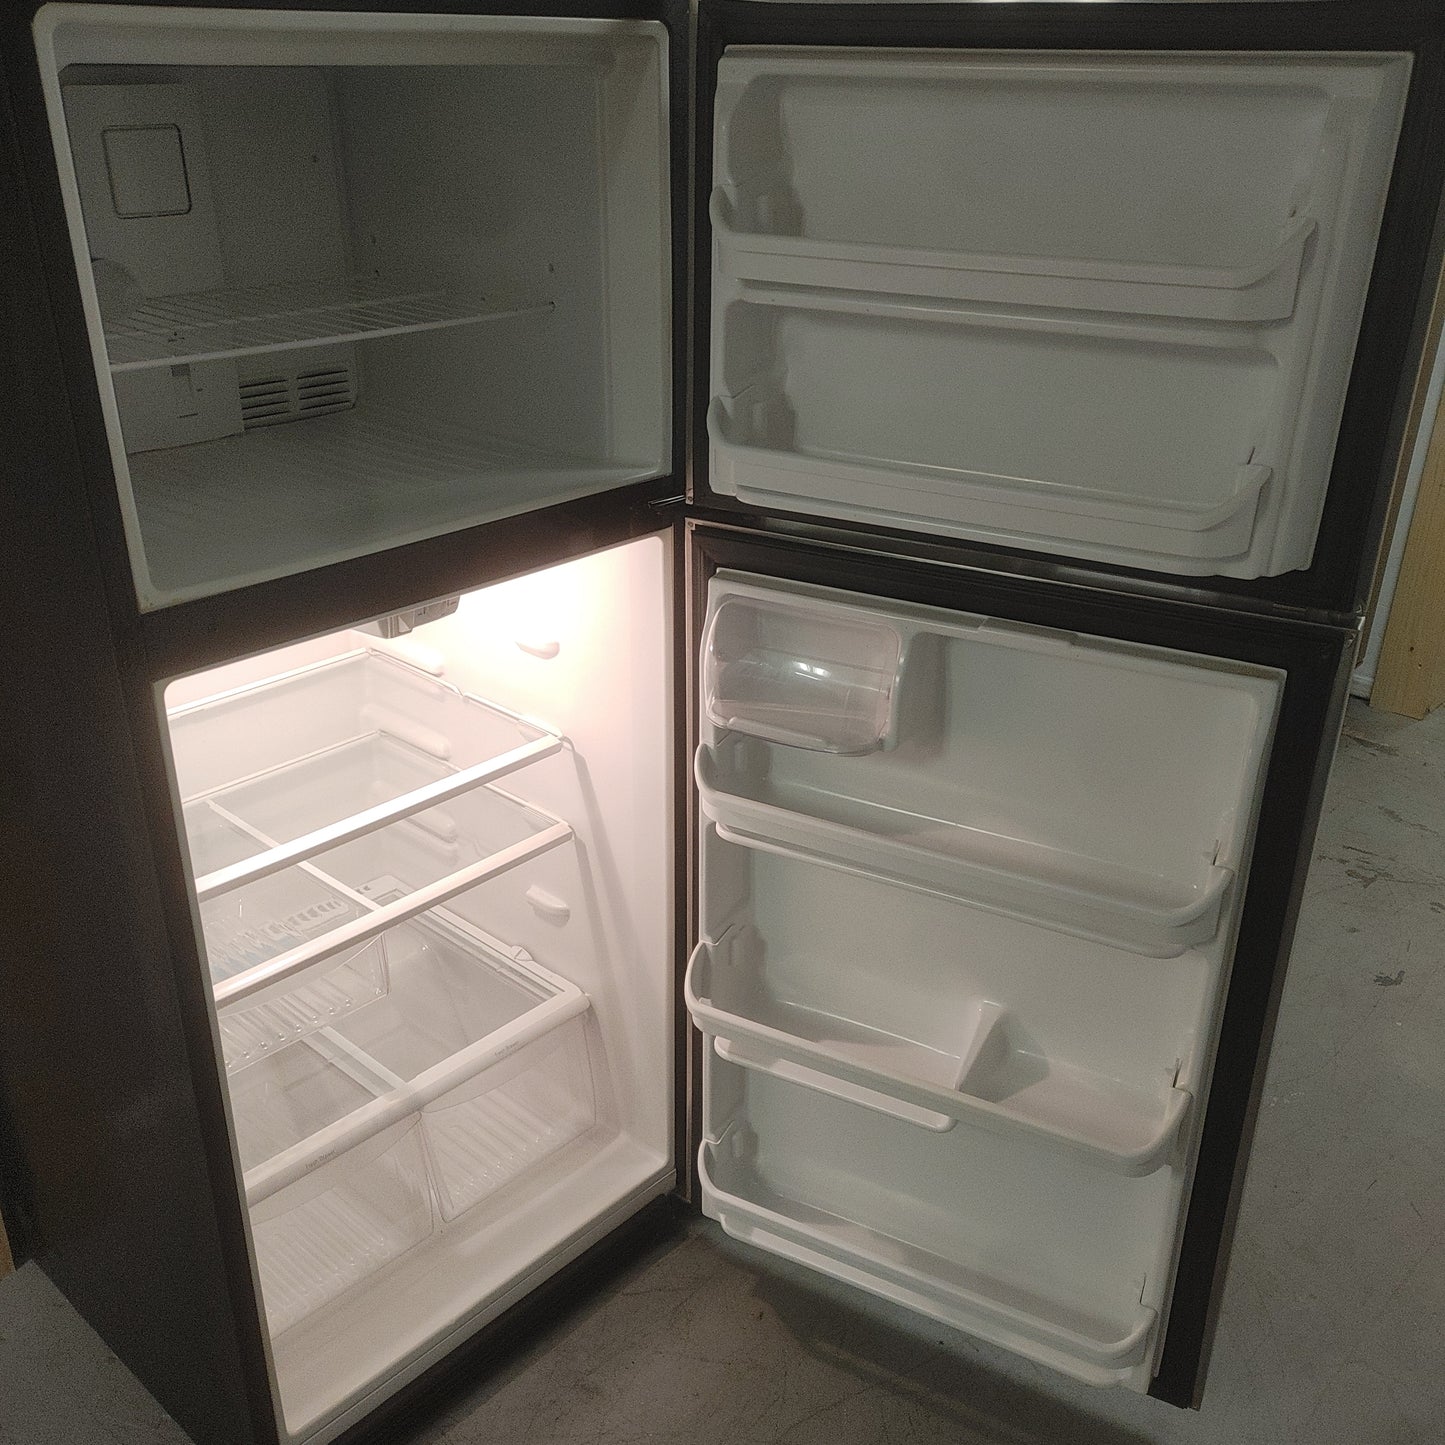 Used Frigidaire 20.4 cubic foot top freezer refrigerator. Stainless